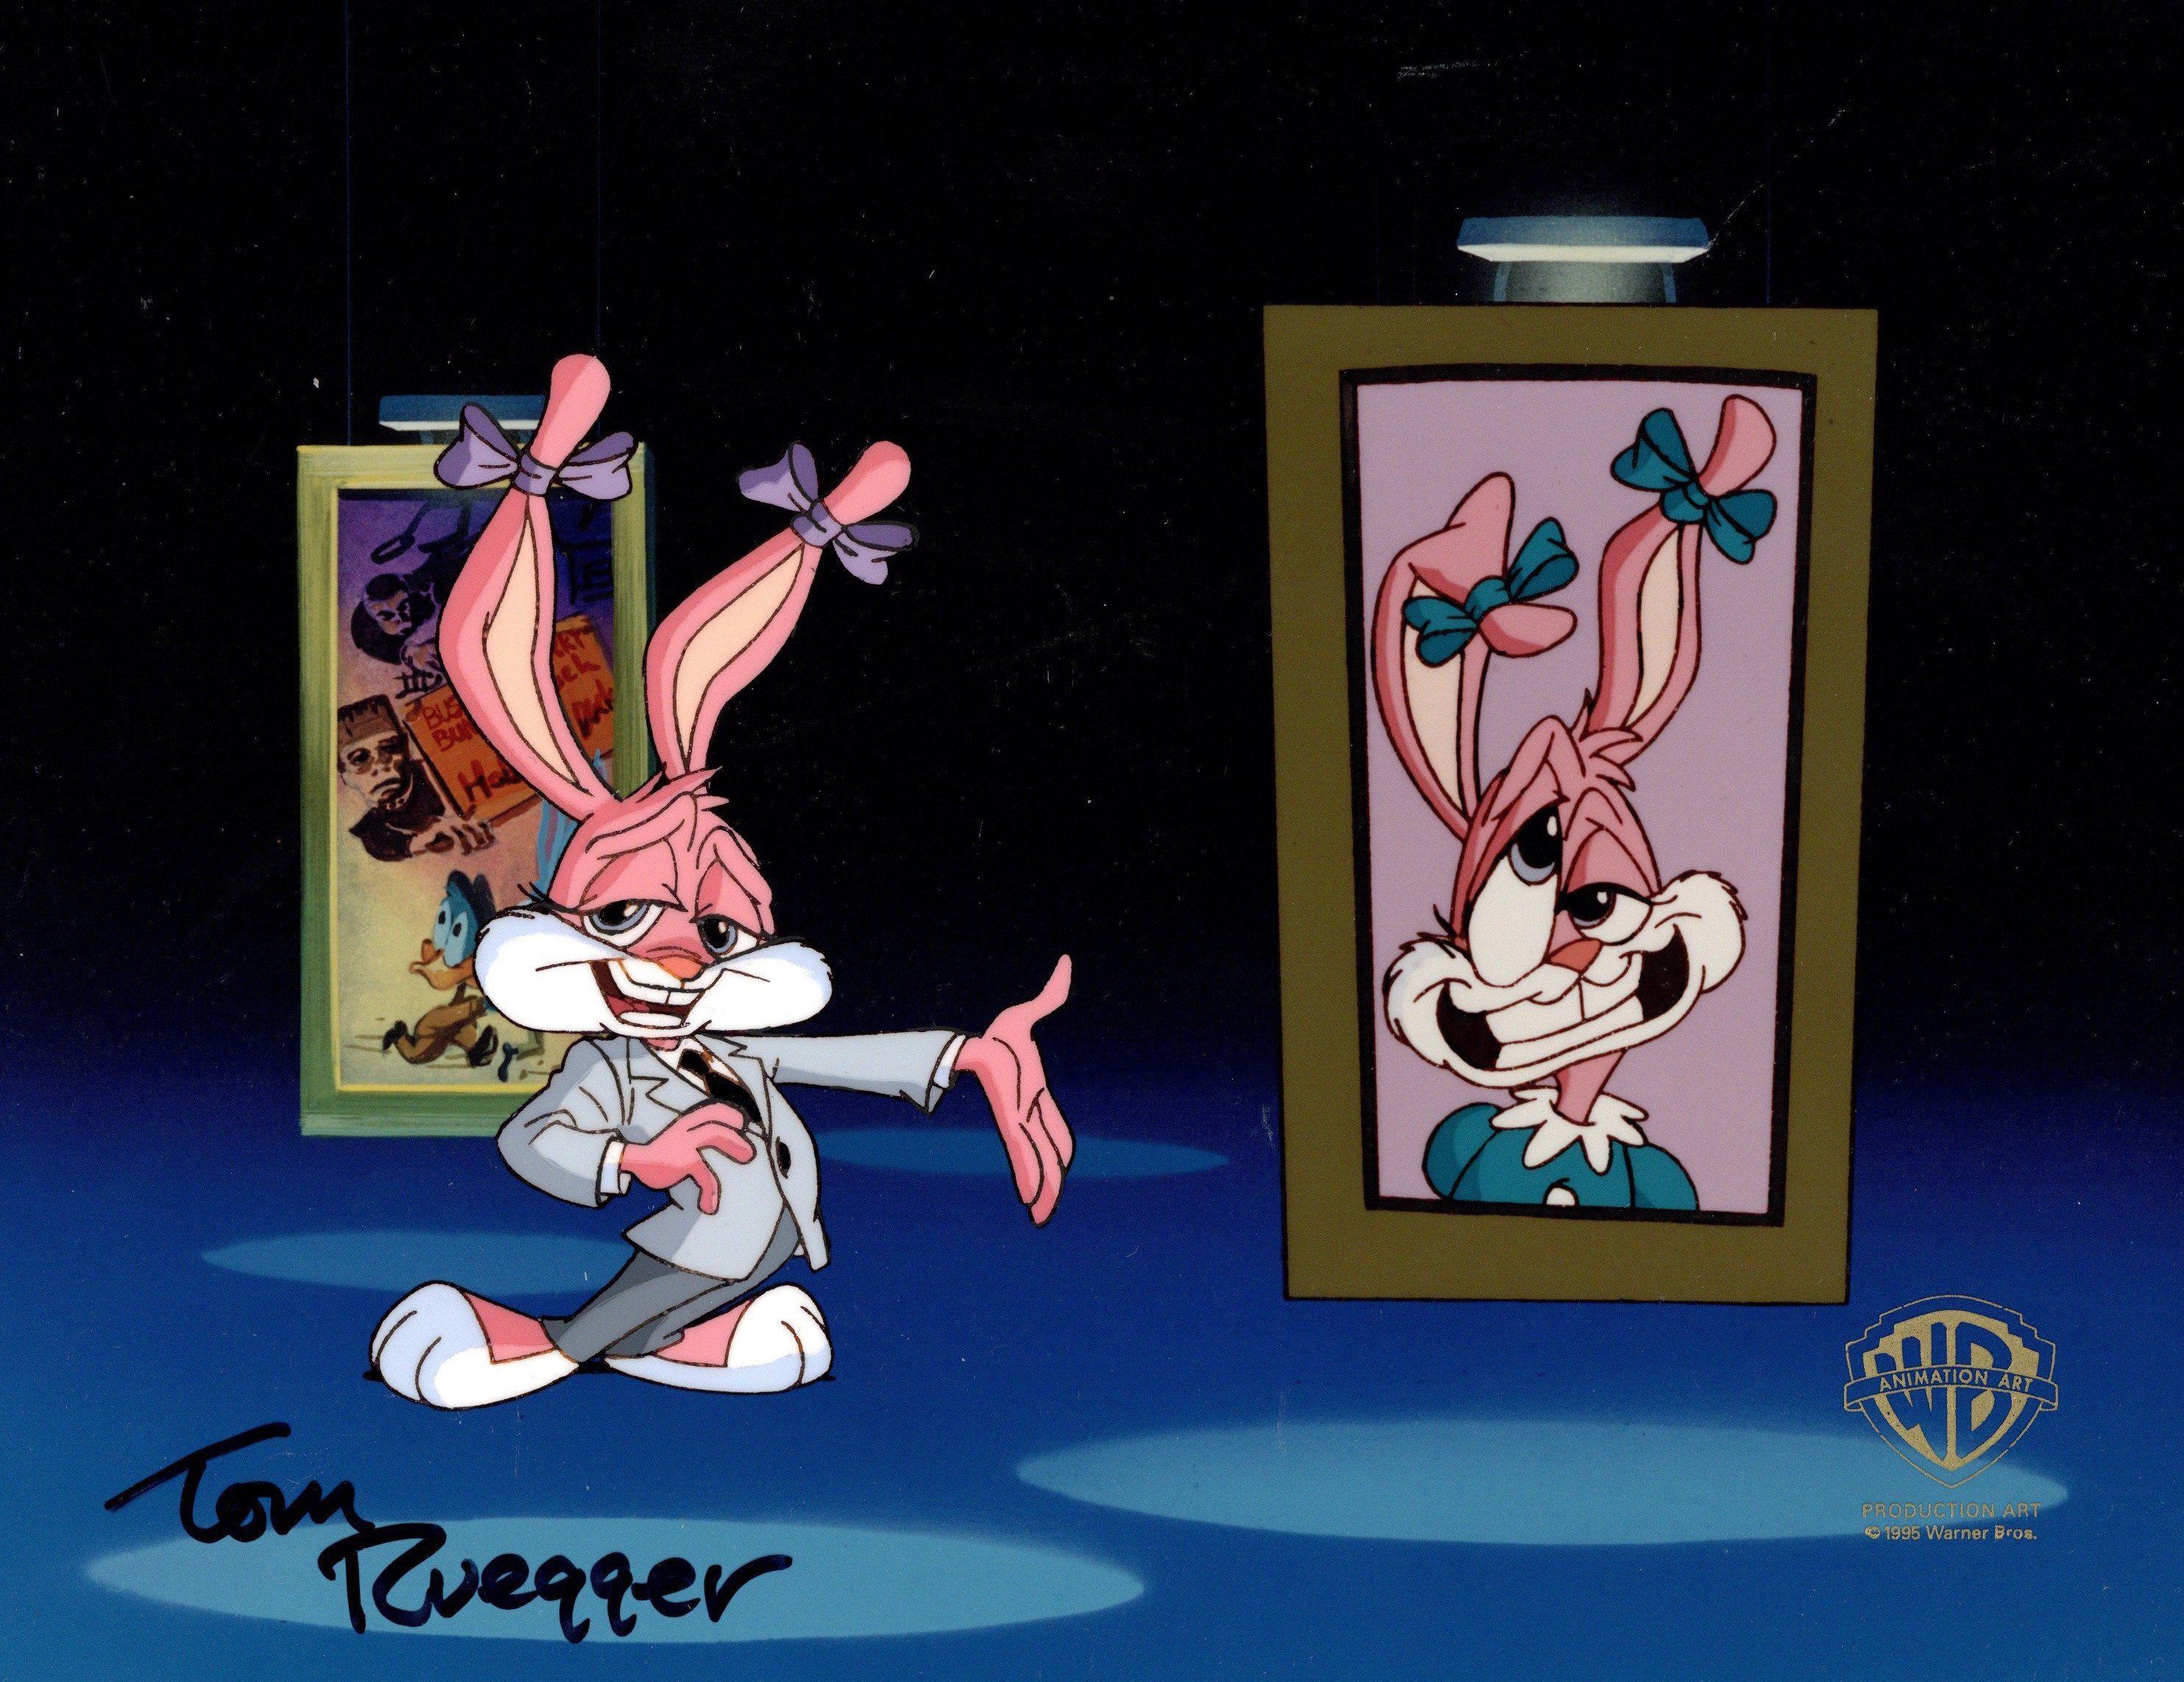 Tiny Toons Original Production Cel Signed by Tom Ruegger: Babs Bunny - Art by Warner Bros. Studio Artists